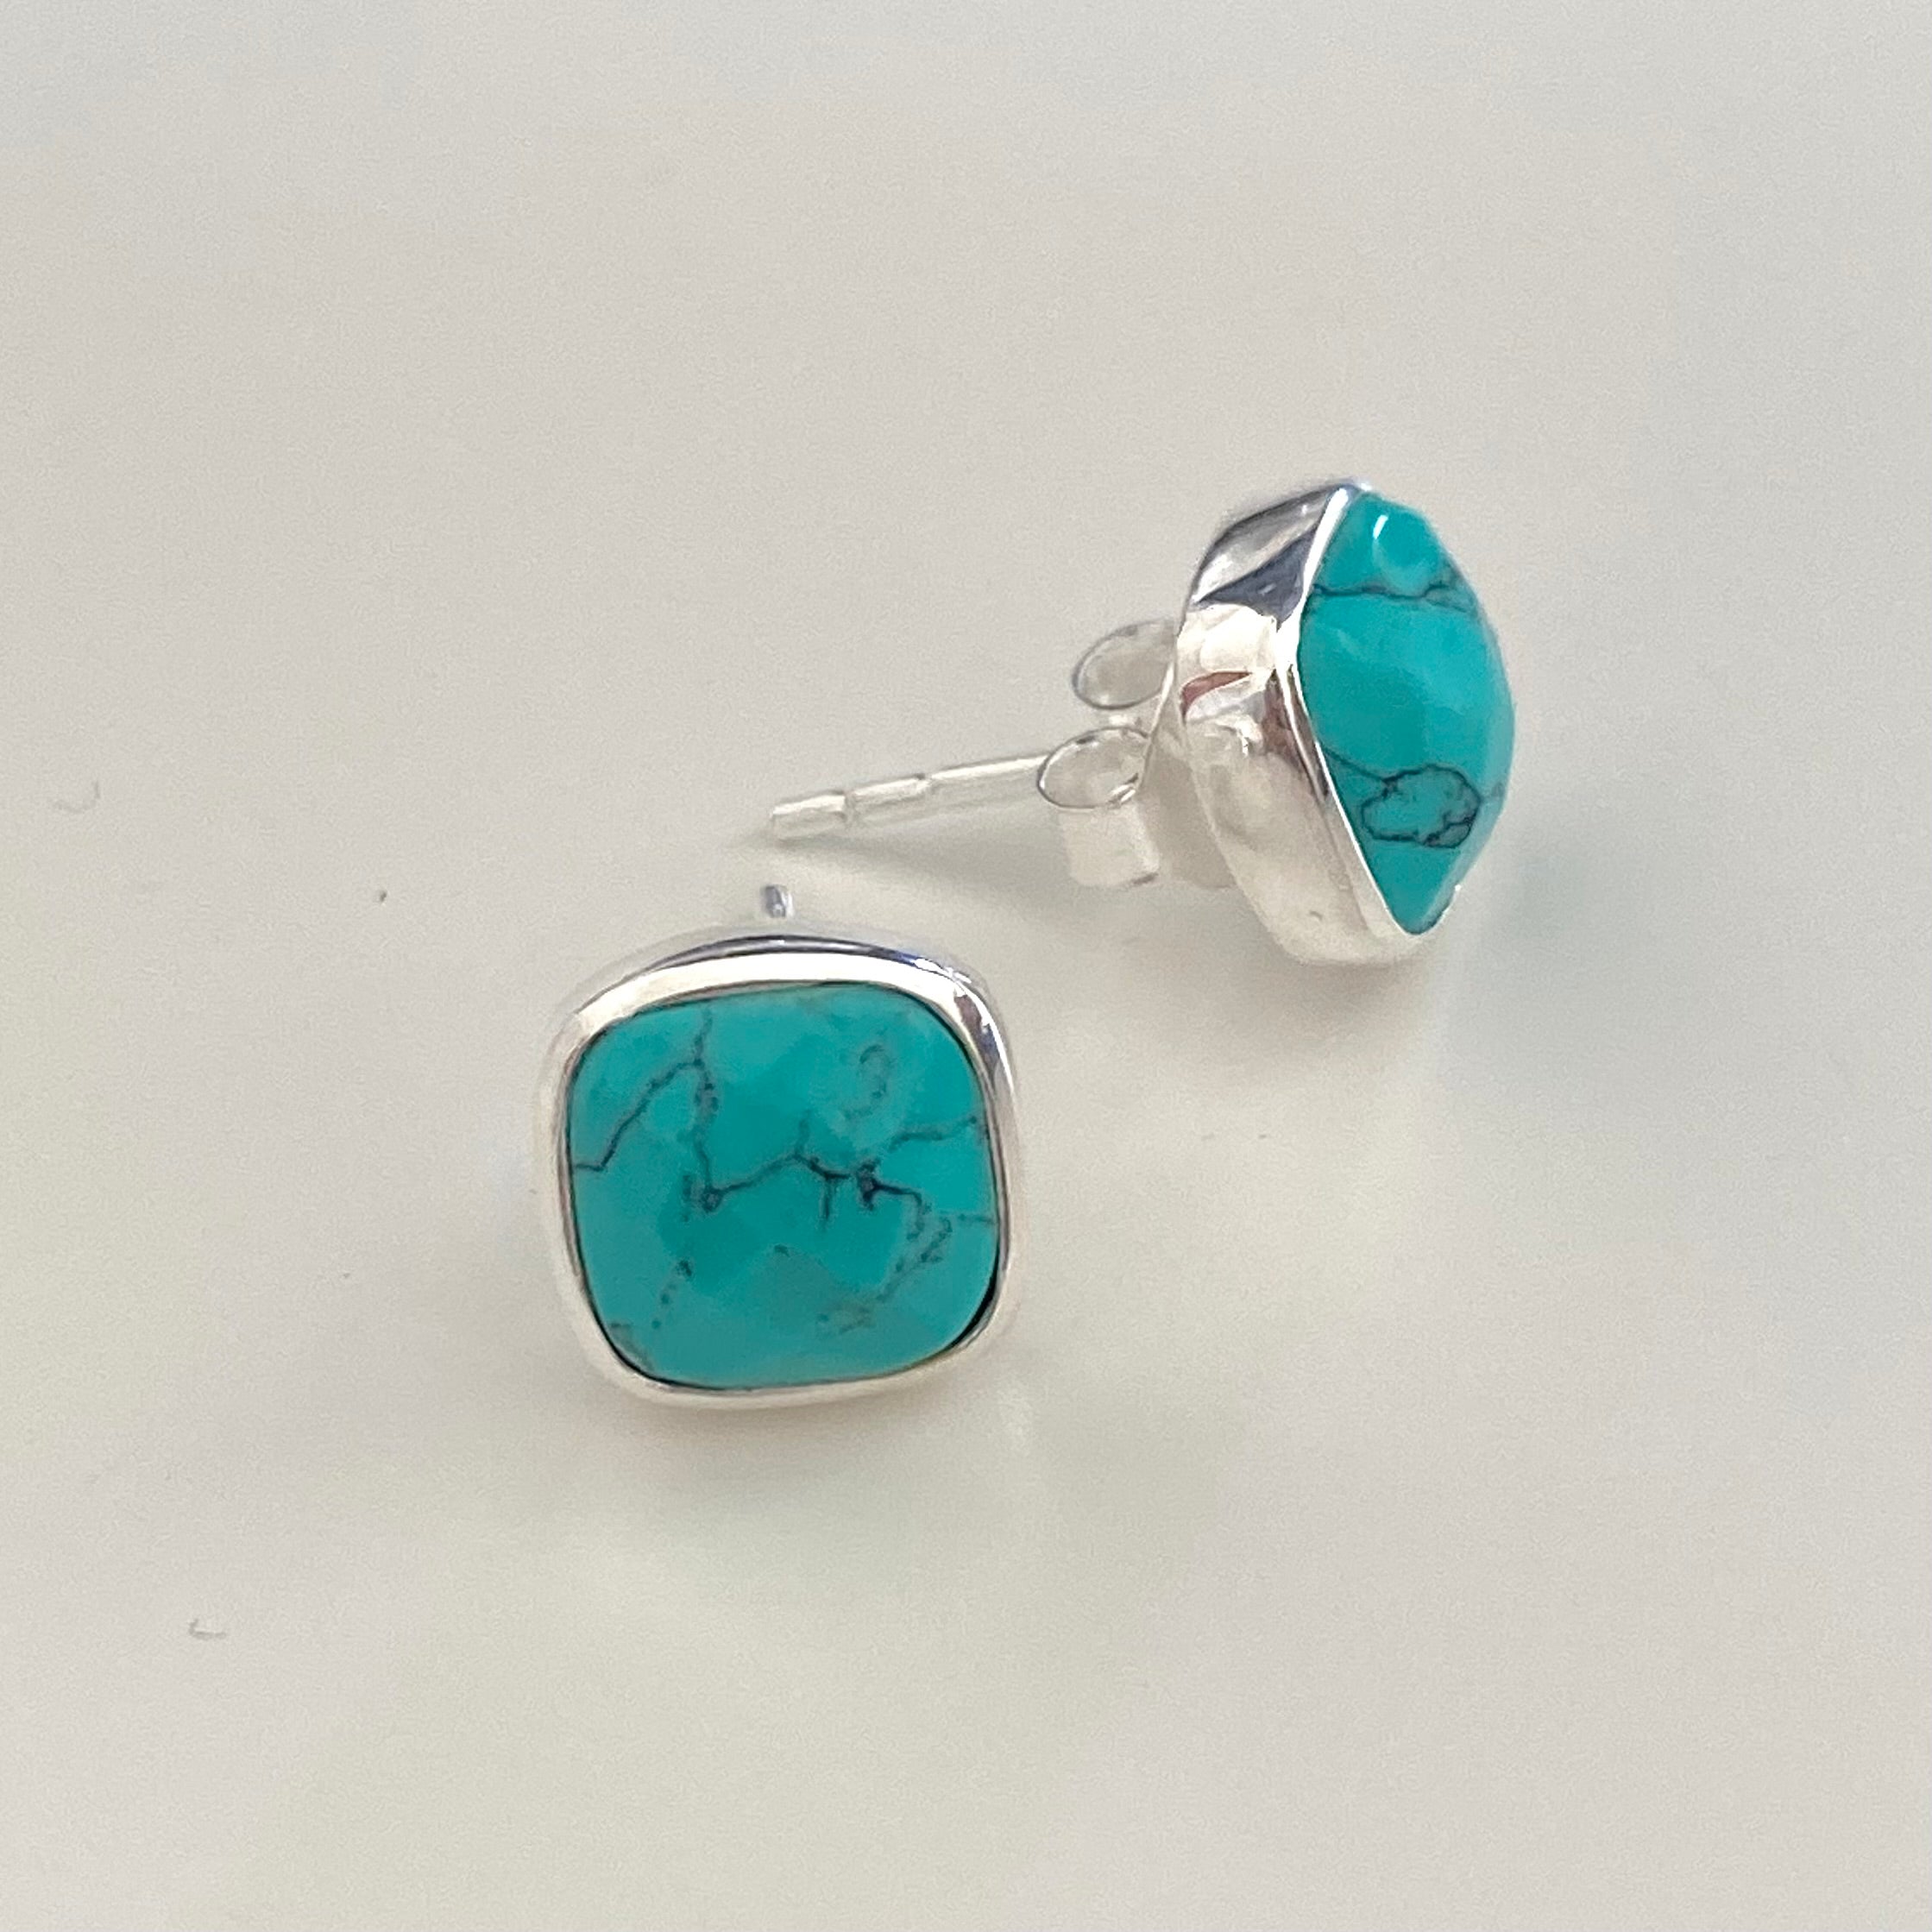 Faceted Square Turquoise Gemstone Stud Earrings in Sterling Silver